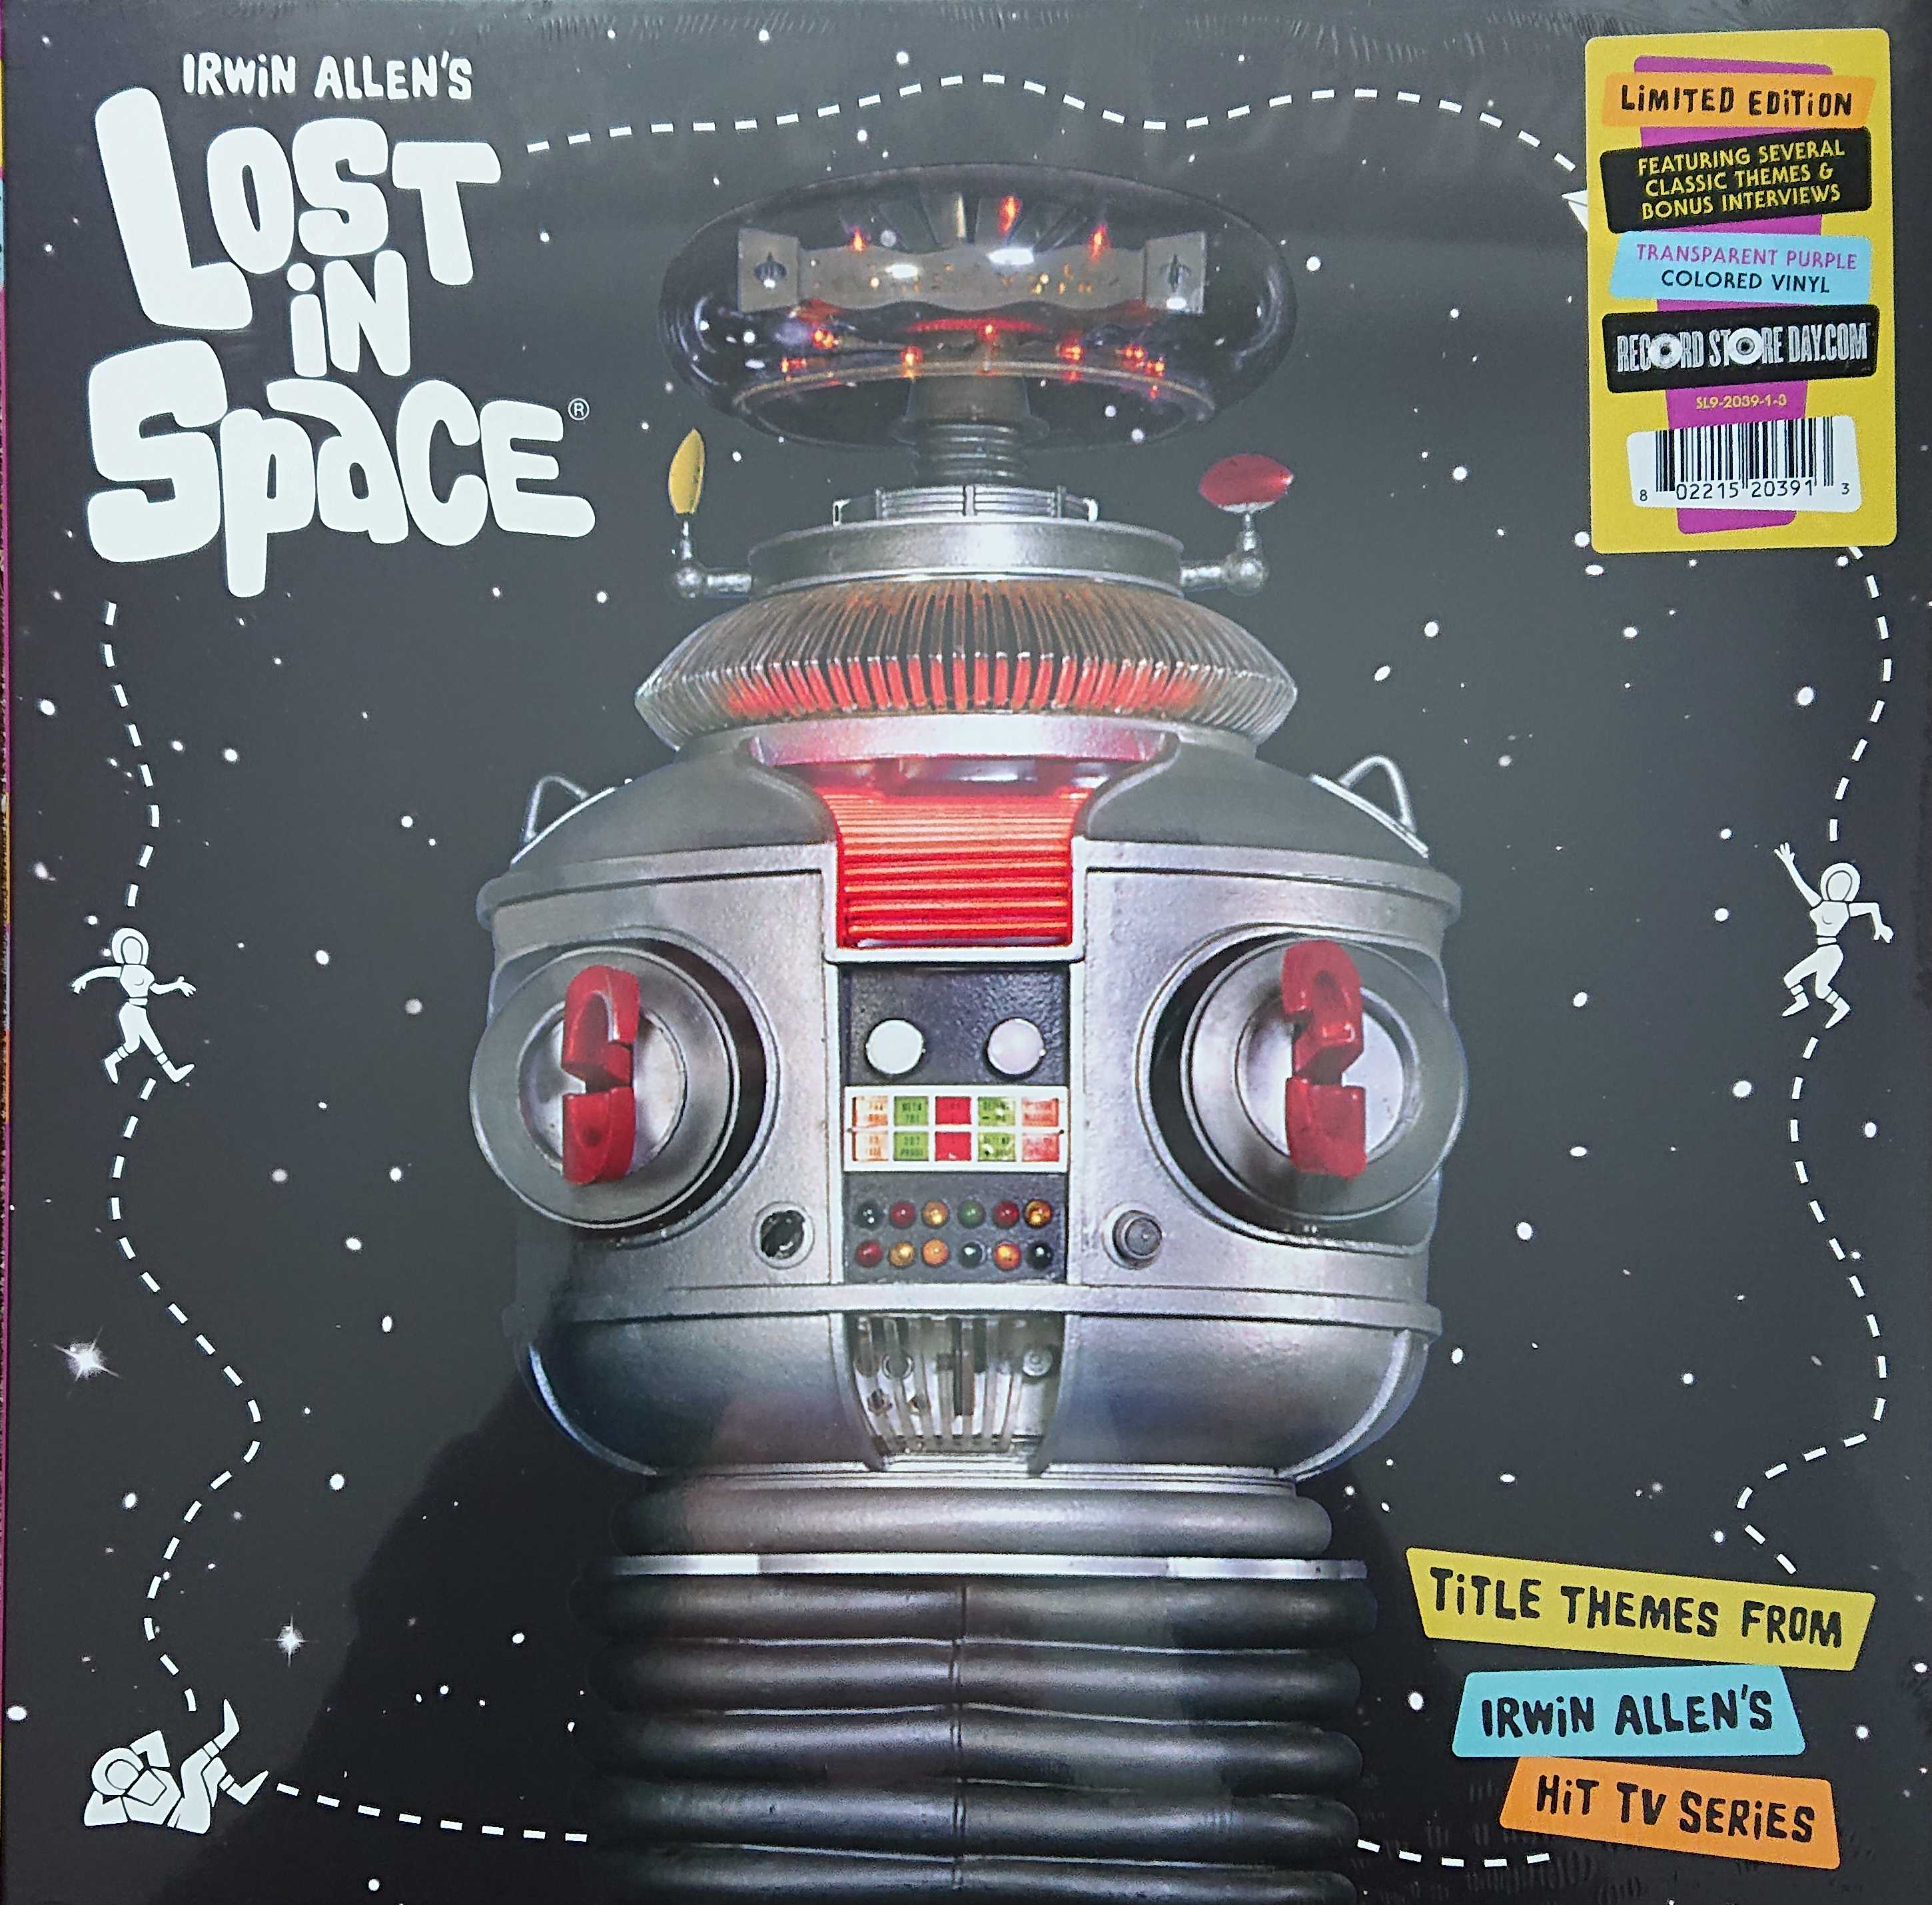 Picture of Lost in space by artist V from ITV, Channel 4 and Channel 5 albums library